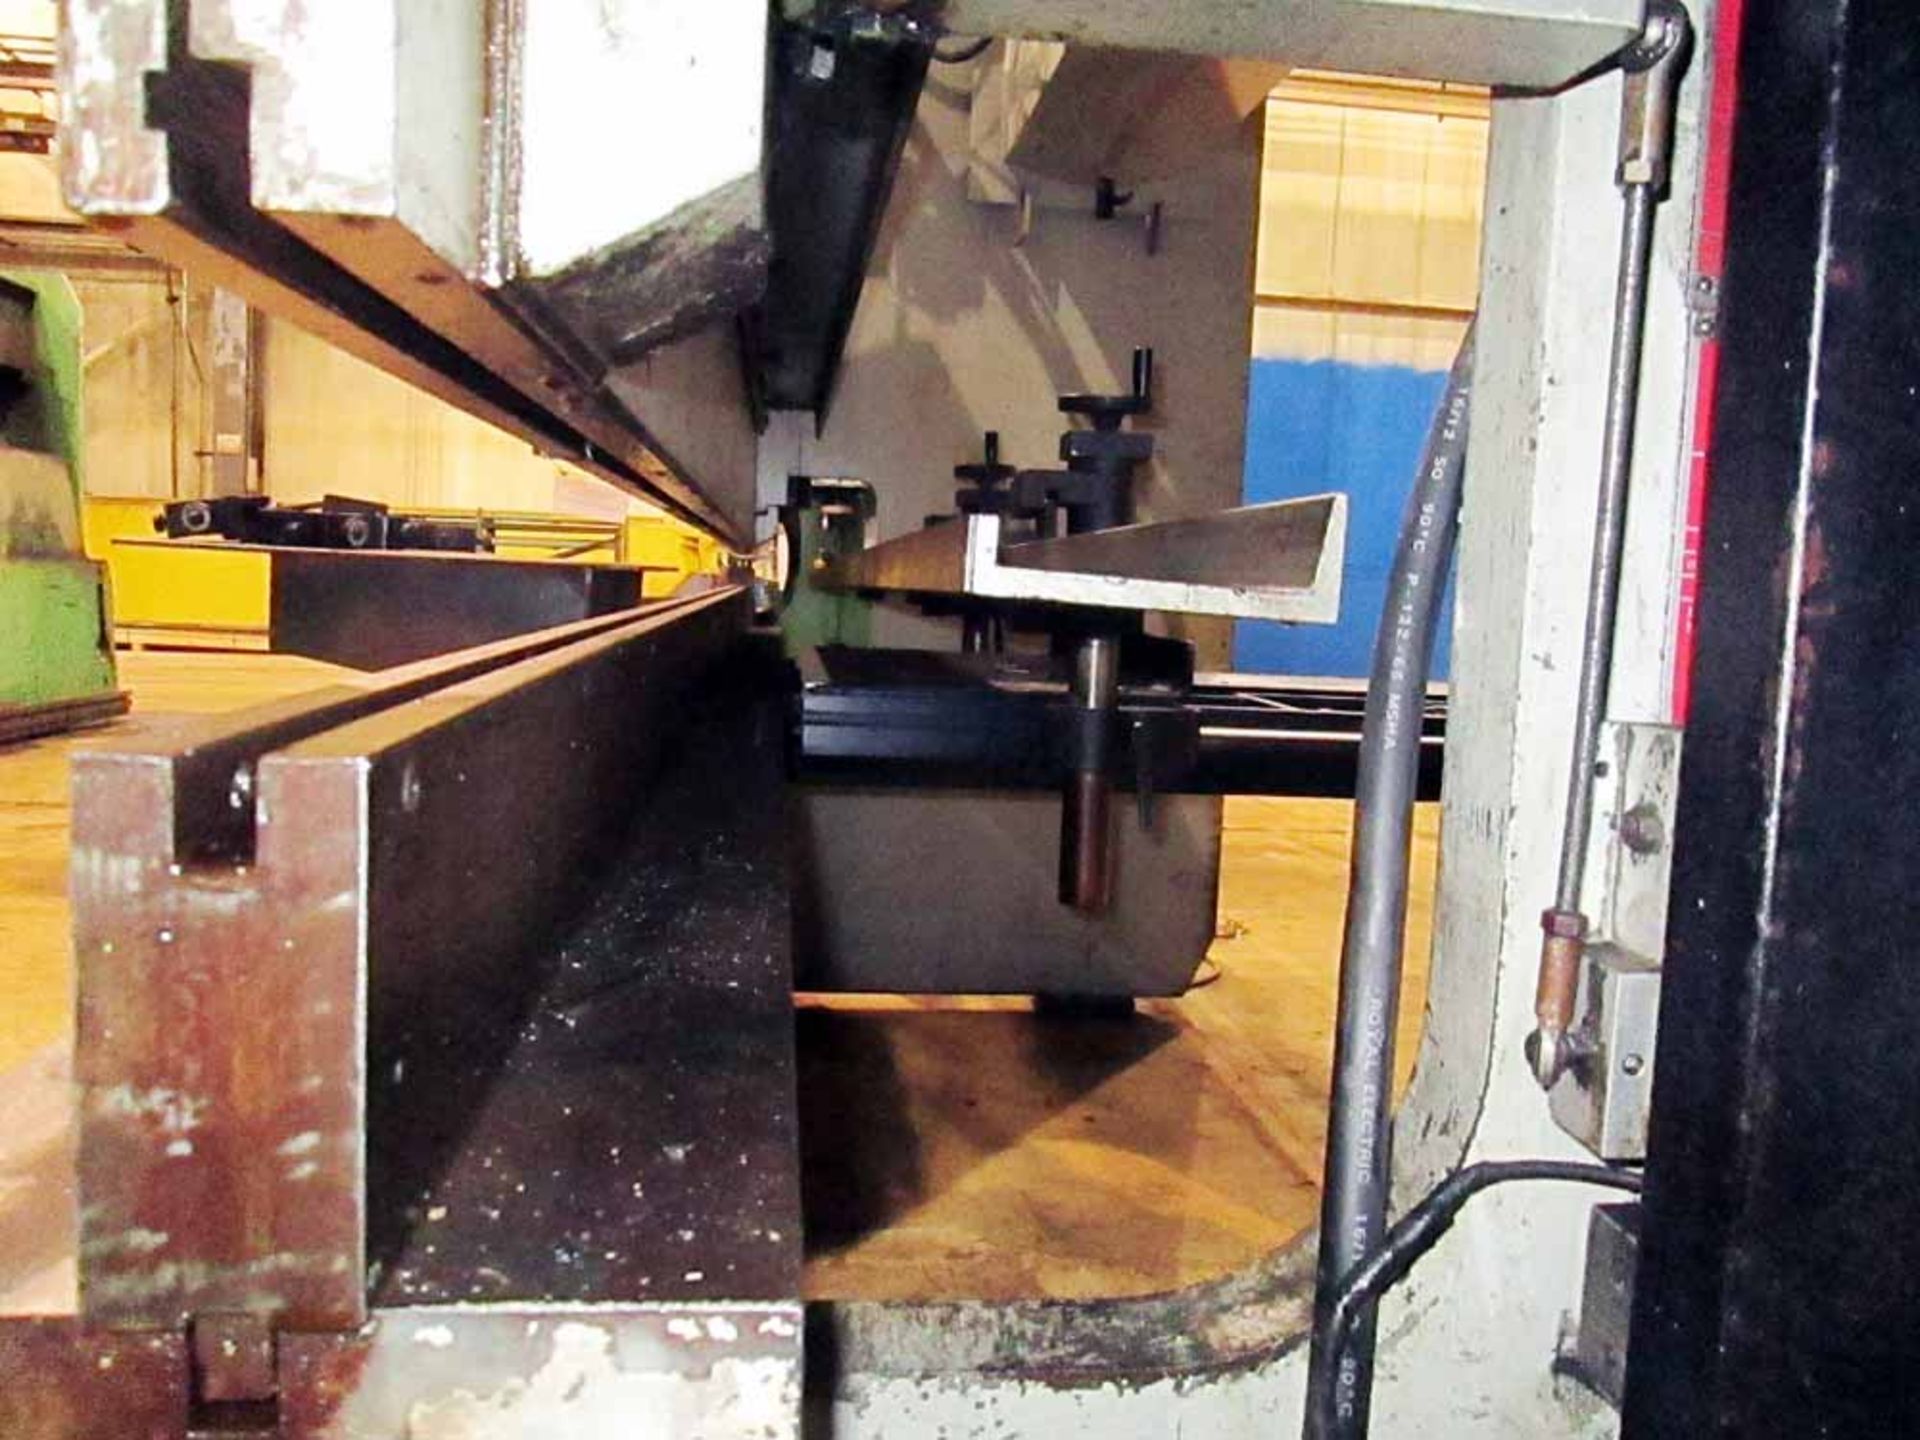 Pacific CNC 2 Axis Hyd. Press Brake, 110-Ton x 12' - Located In Painesville, OH - 6426 - Image 11 of 12